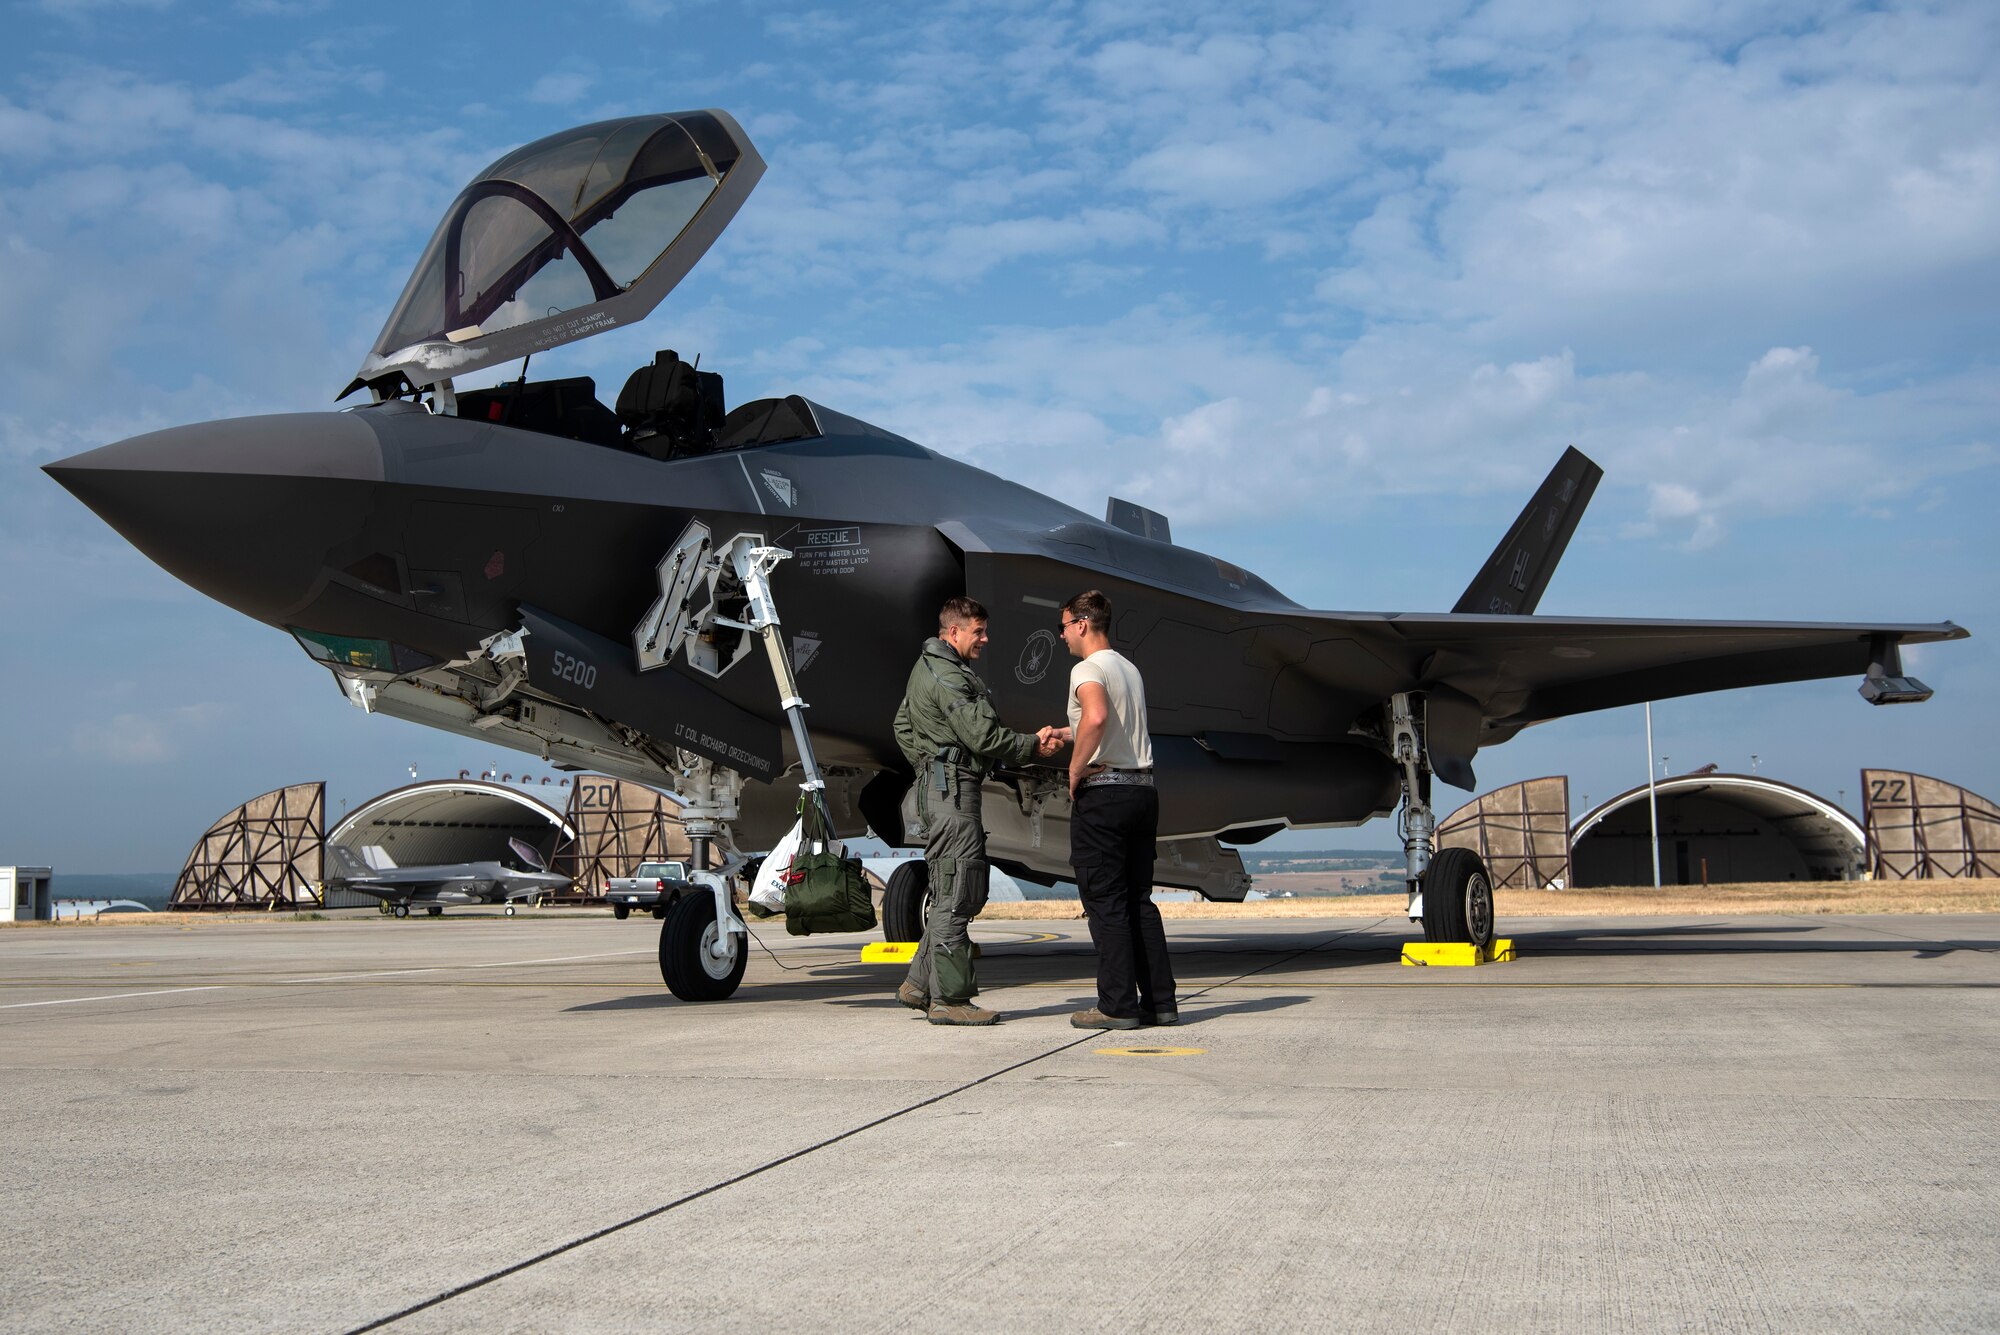 U.S. Air Force Capt. Joseph Walz, 421st Fighter Squadron F-35A Lightning II pilot, shakes hands with Airman 1st Class Cody Albert, 421st FS crew chief, during Operation Rapid Forge at Spangdahlem Air Base, Germany, July 18, 2019. Rapid Forge aircraft are forward deploying to the territory of NATO allies in order to enhance readiness and improve interoperability. Participation in multinational operations enhances the U.S. Air Force's relationship with partner militaries. (U.S. Air Force photo by Airman 1st Class Valerie Seelye)